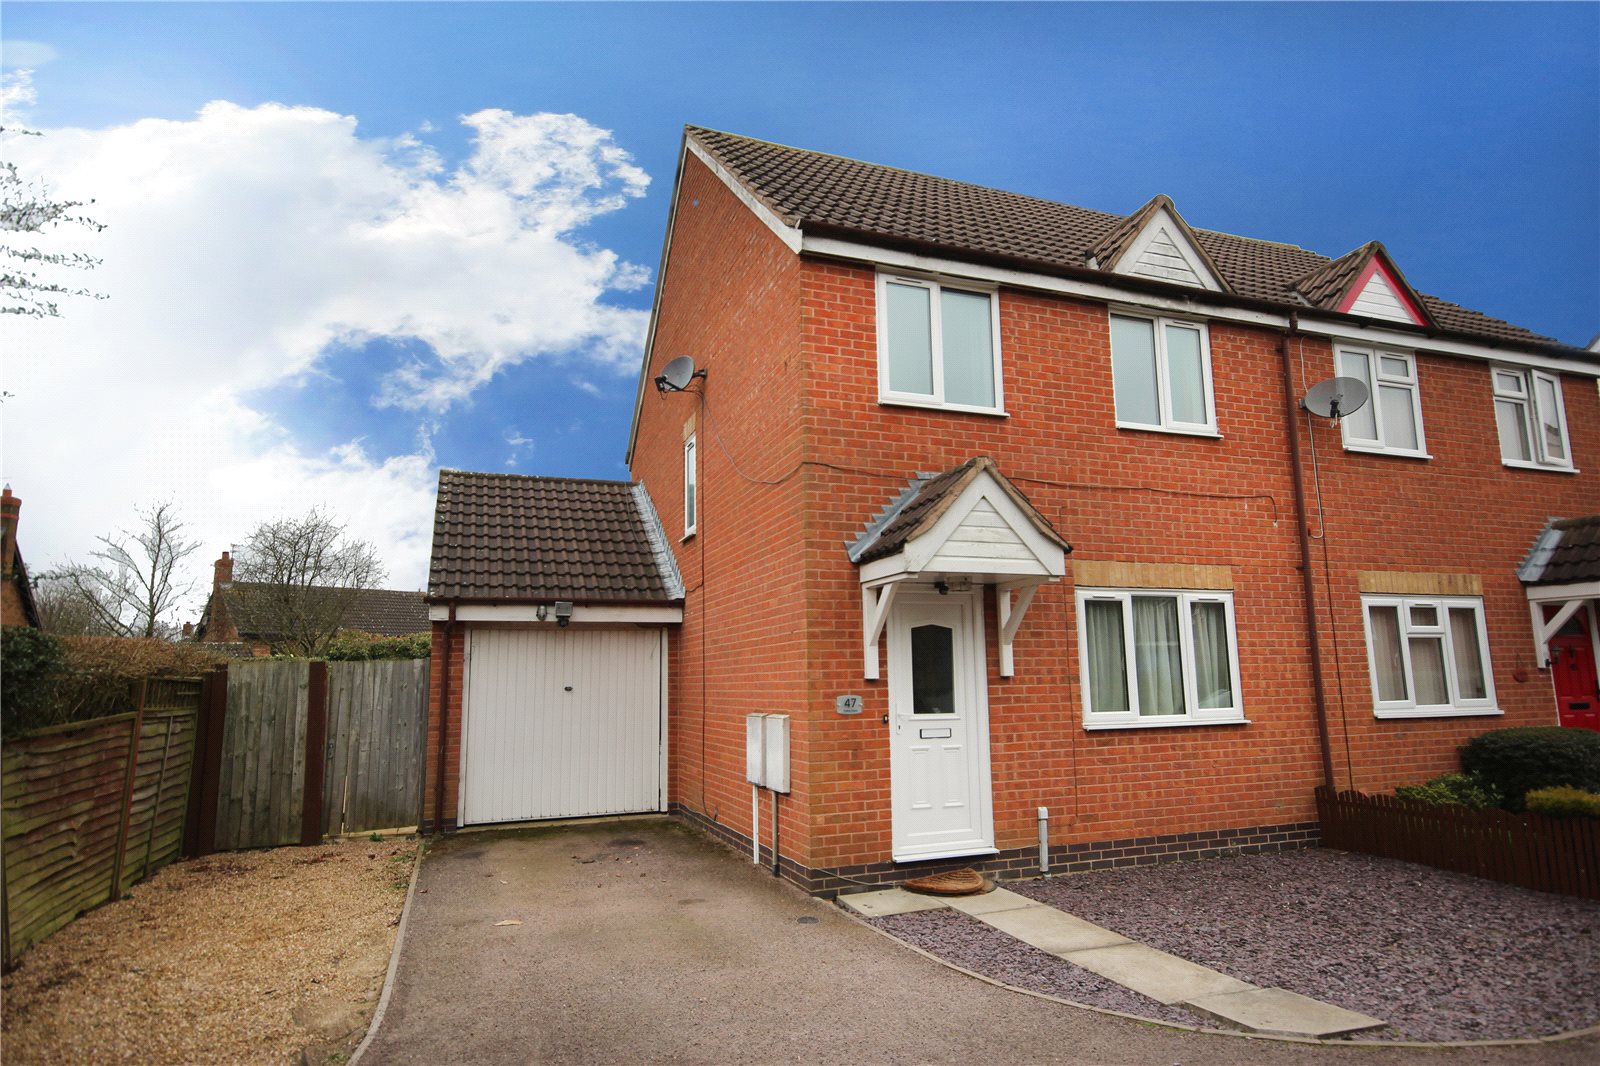 Whitegates Leicester 3 Bedroom House For Sale In Trefoil Close